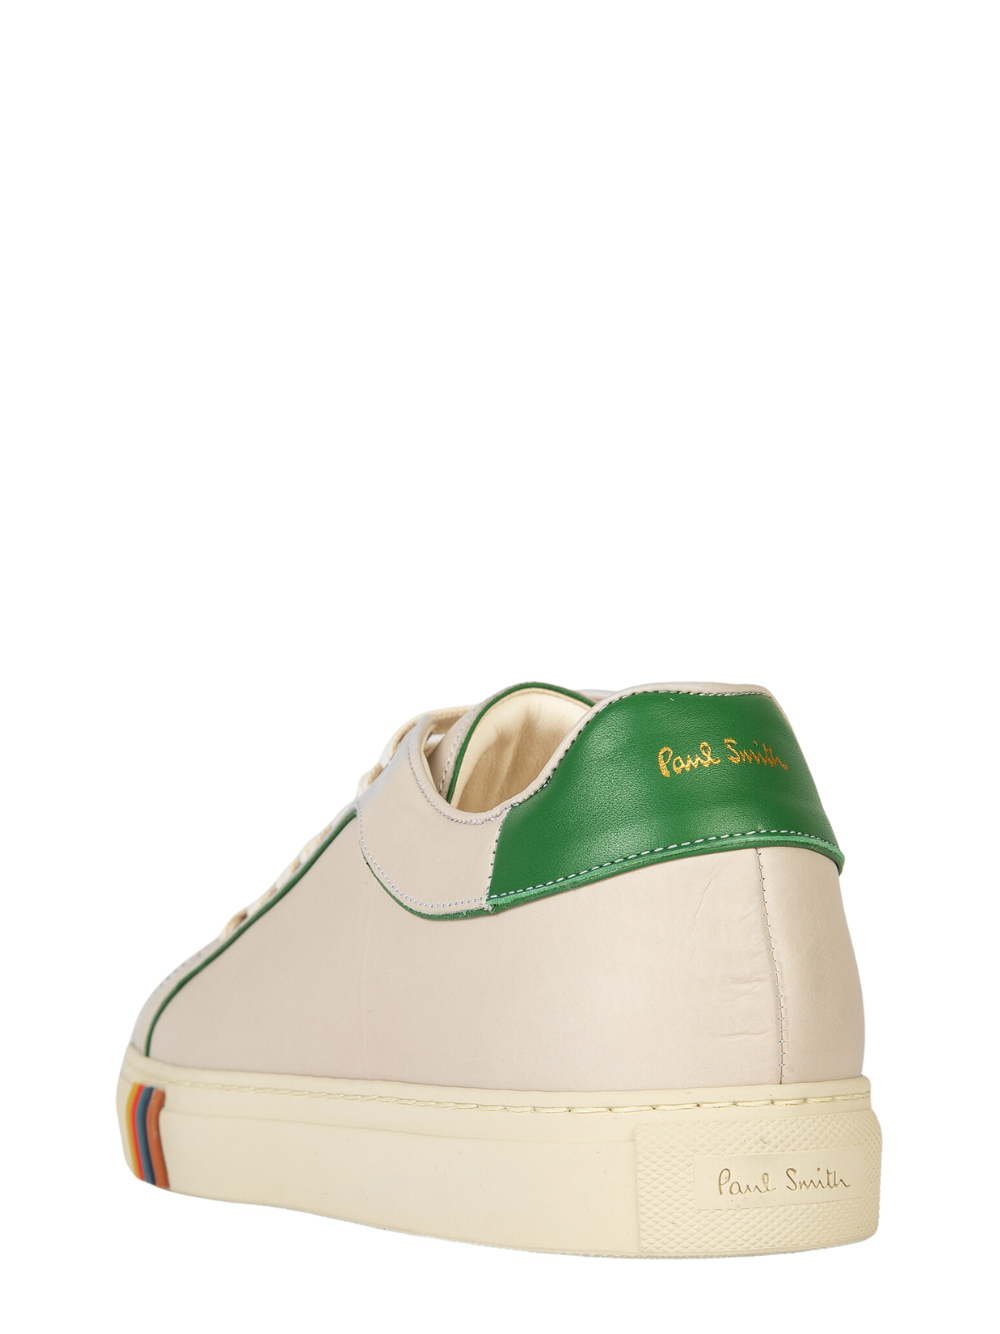 Paul-Smith-Men-Basso-Trainers-with-Green-Trim-Cream-4